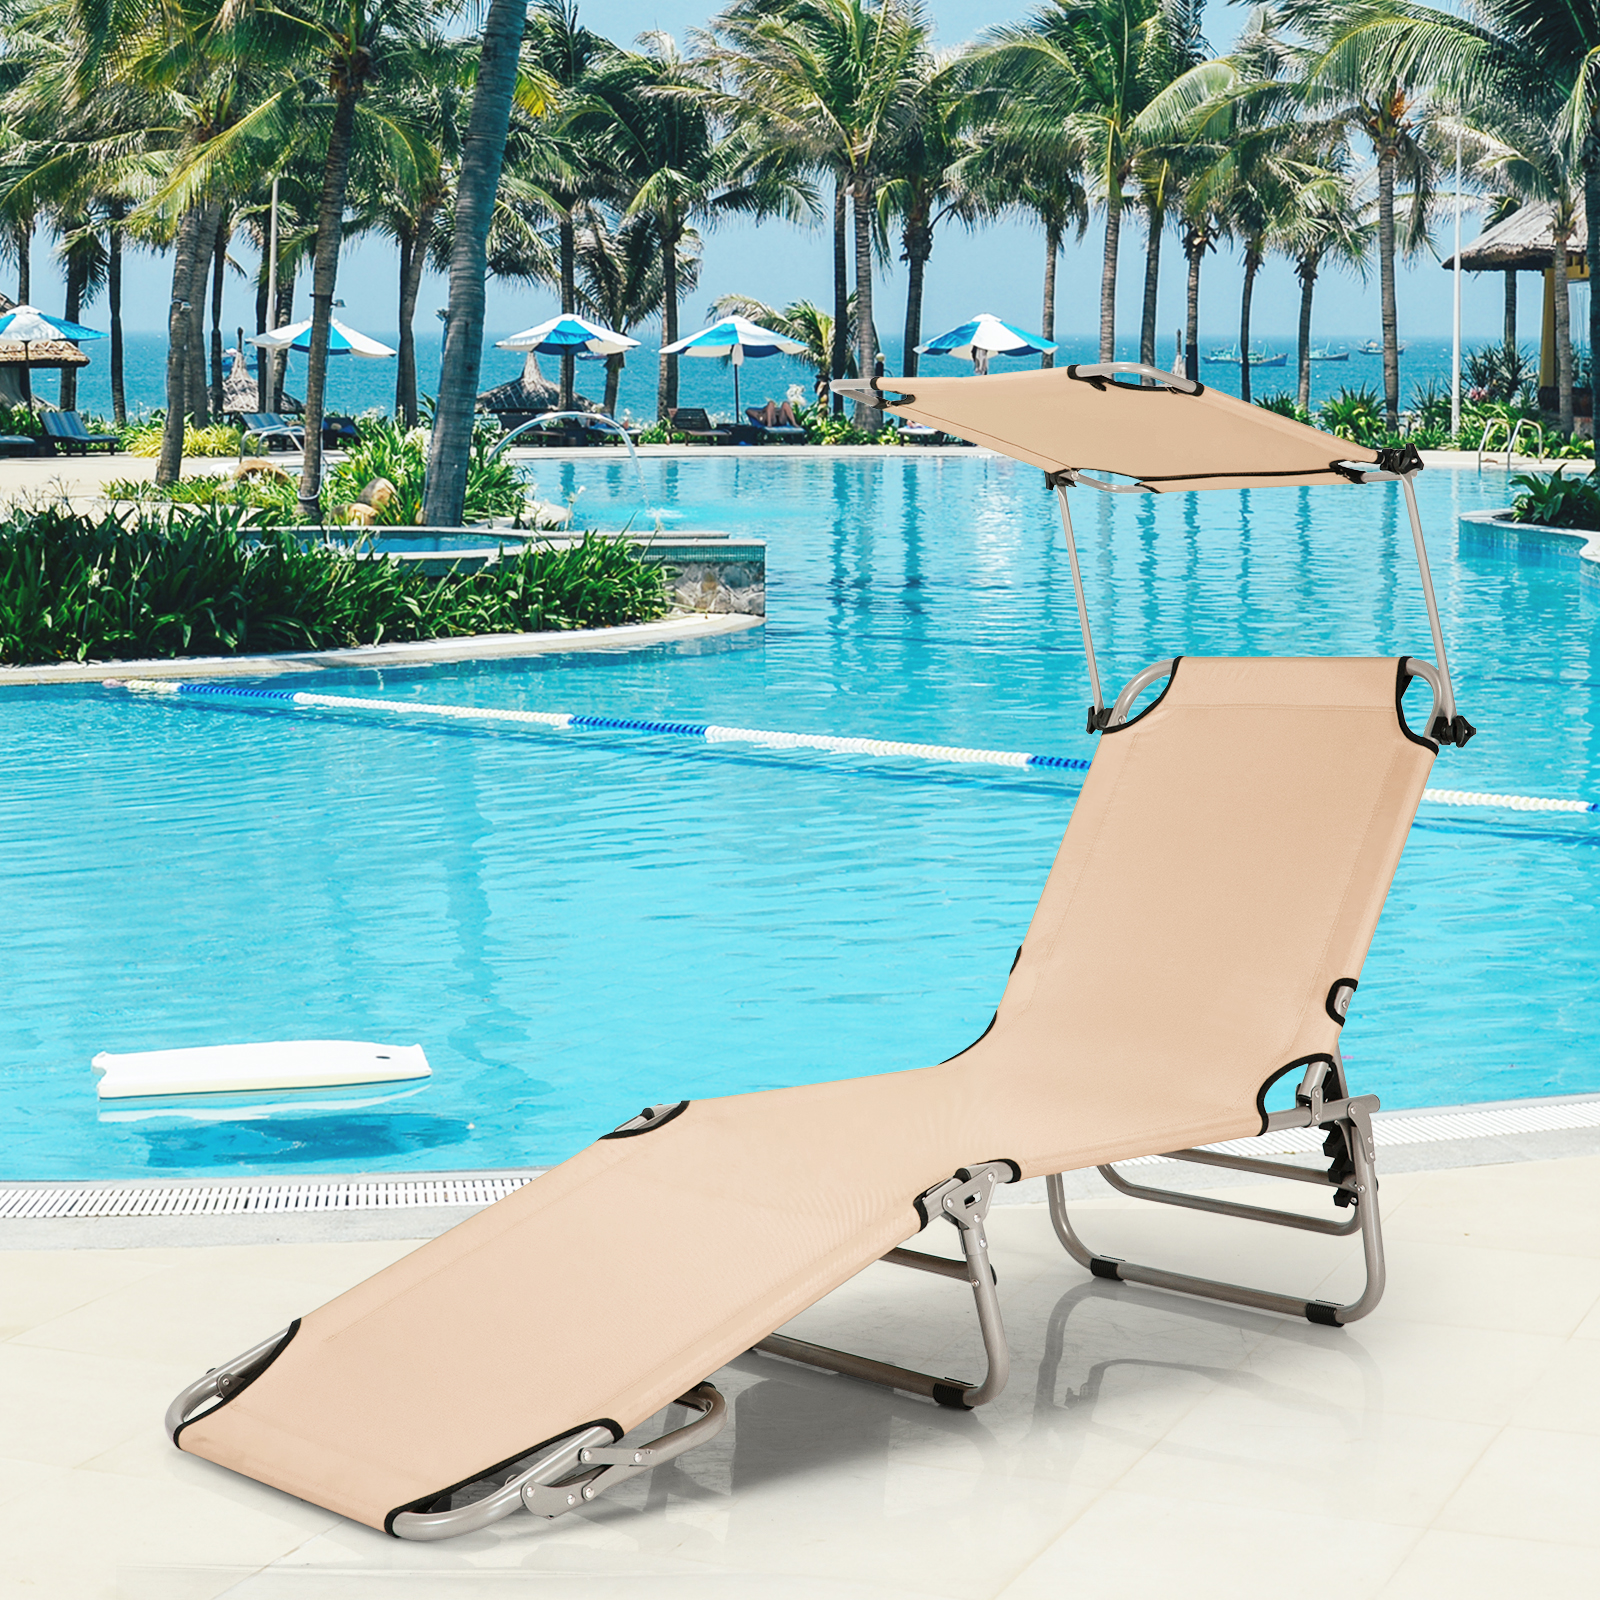 Gymax Foldable Lounge Chair Adjustable Outdoor Beach Patio Pool Recliner W/ Sun Shade - image 2 of 10